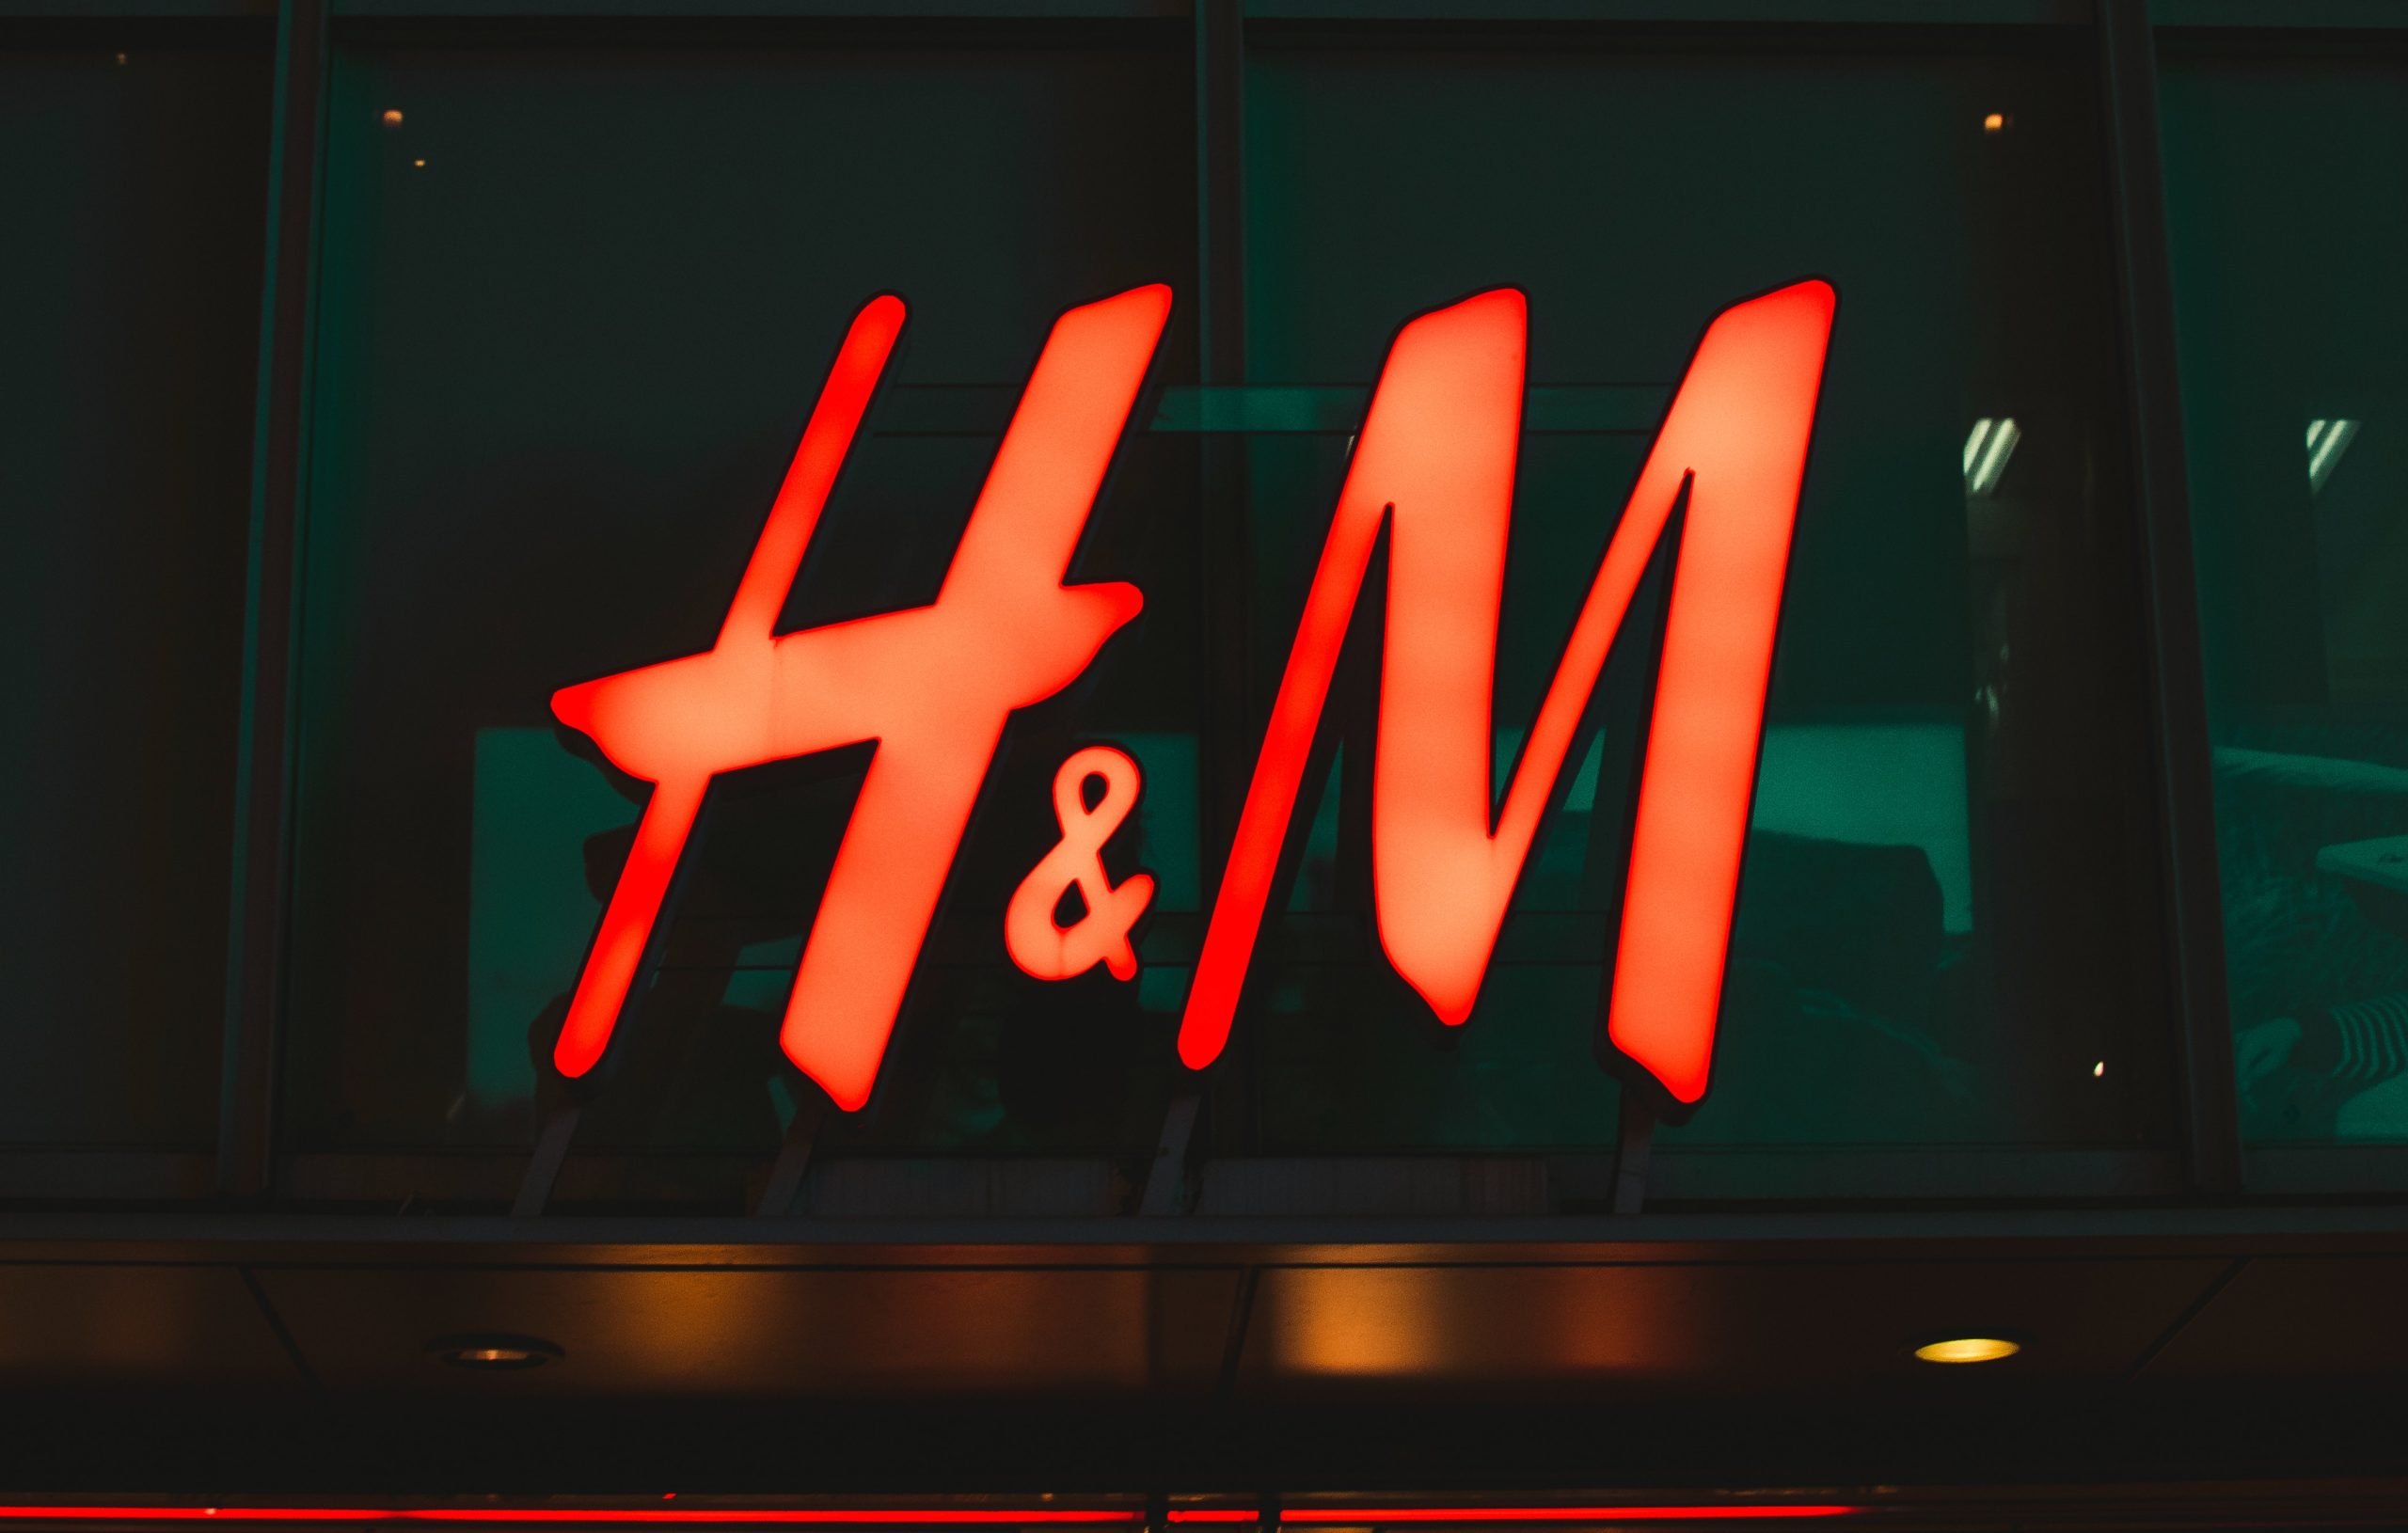 Swedish retailer H&M said in a vaguely-worded statement that it is committed to its operations in China. Photo: Unsplash/itssecondkaki